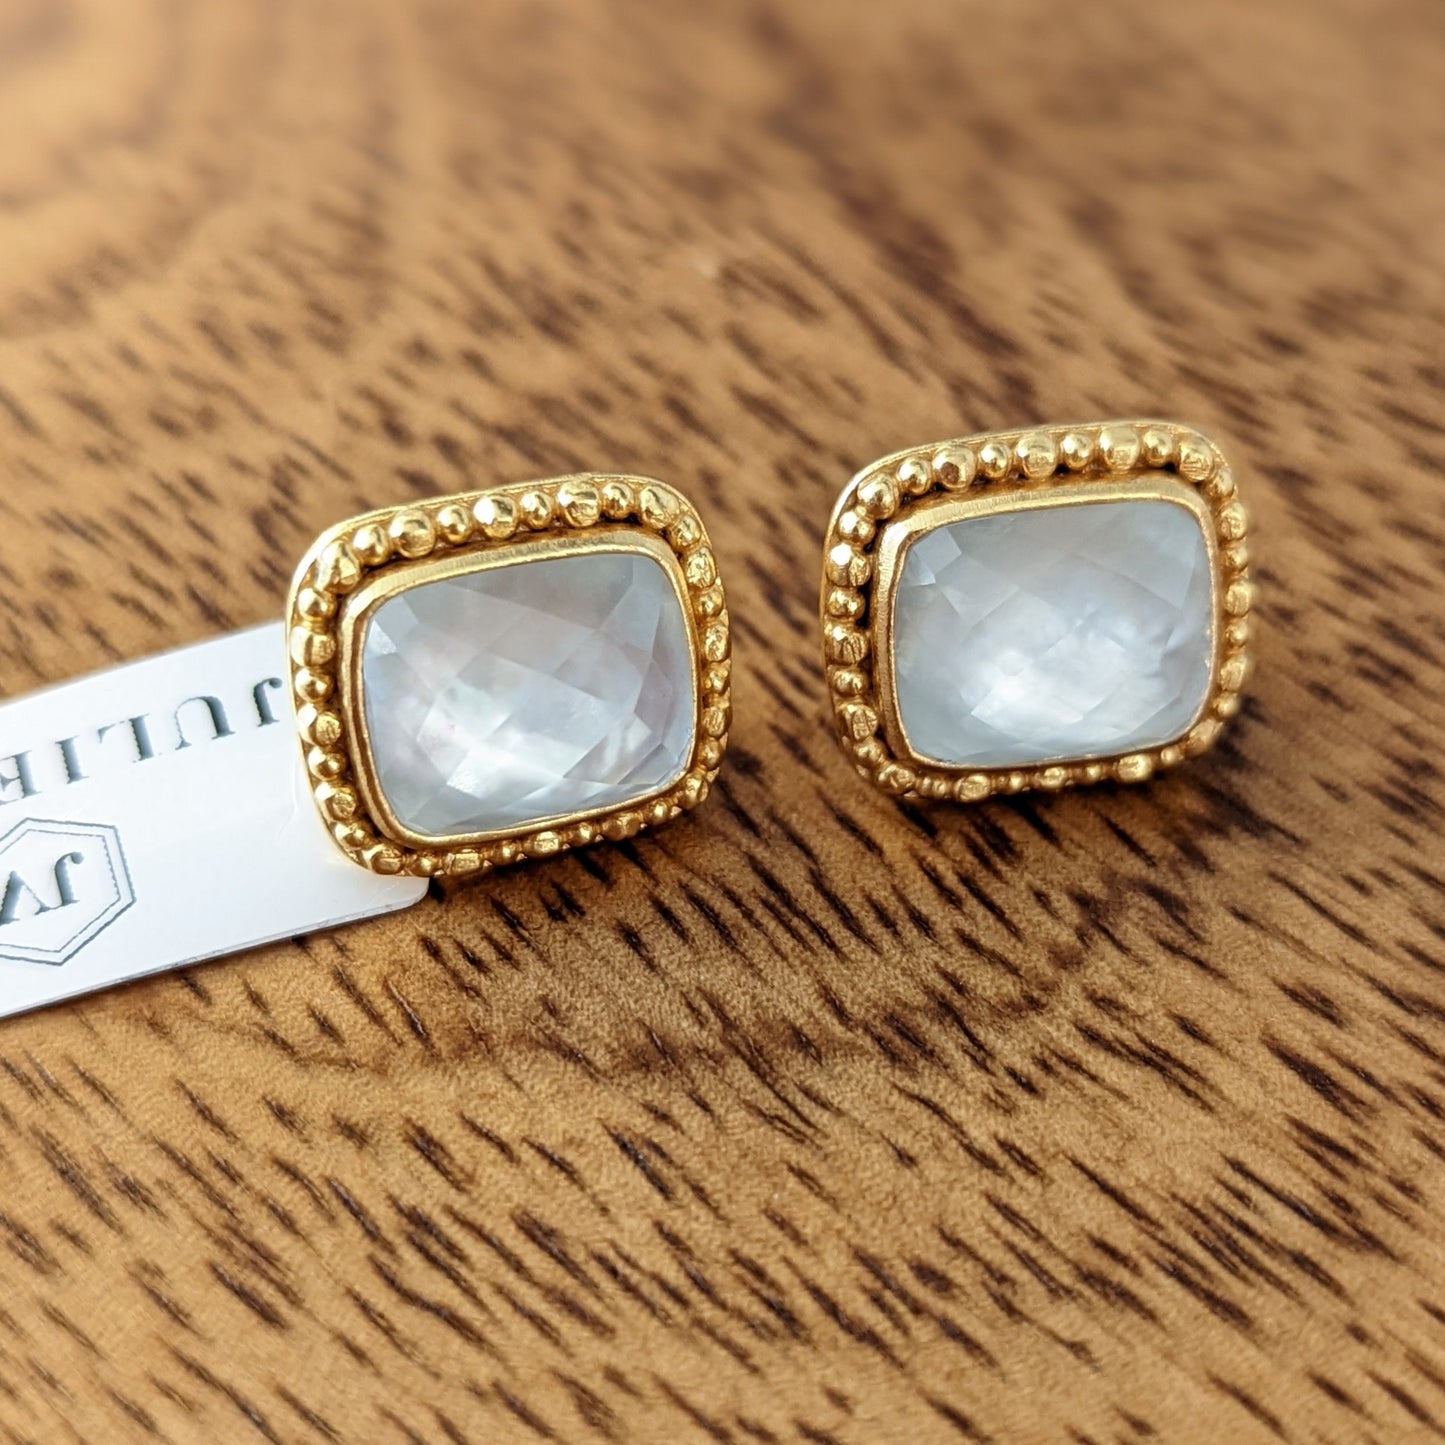 Marbella Stud Iridescent Clear Crystal by Julie Vos. A rectangular sparkling gemstone—catches the light and are surrounded by a gilded frame, .6 inches, 24K gold plate. Shop at The Painted Cottage in Edgewater, MD.